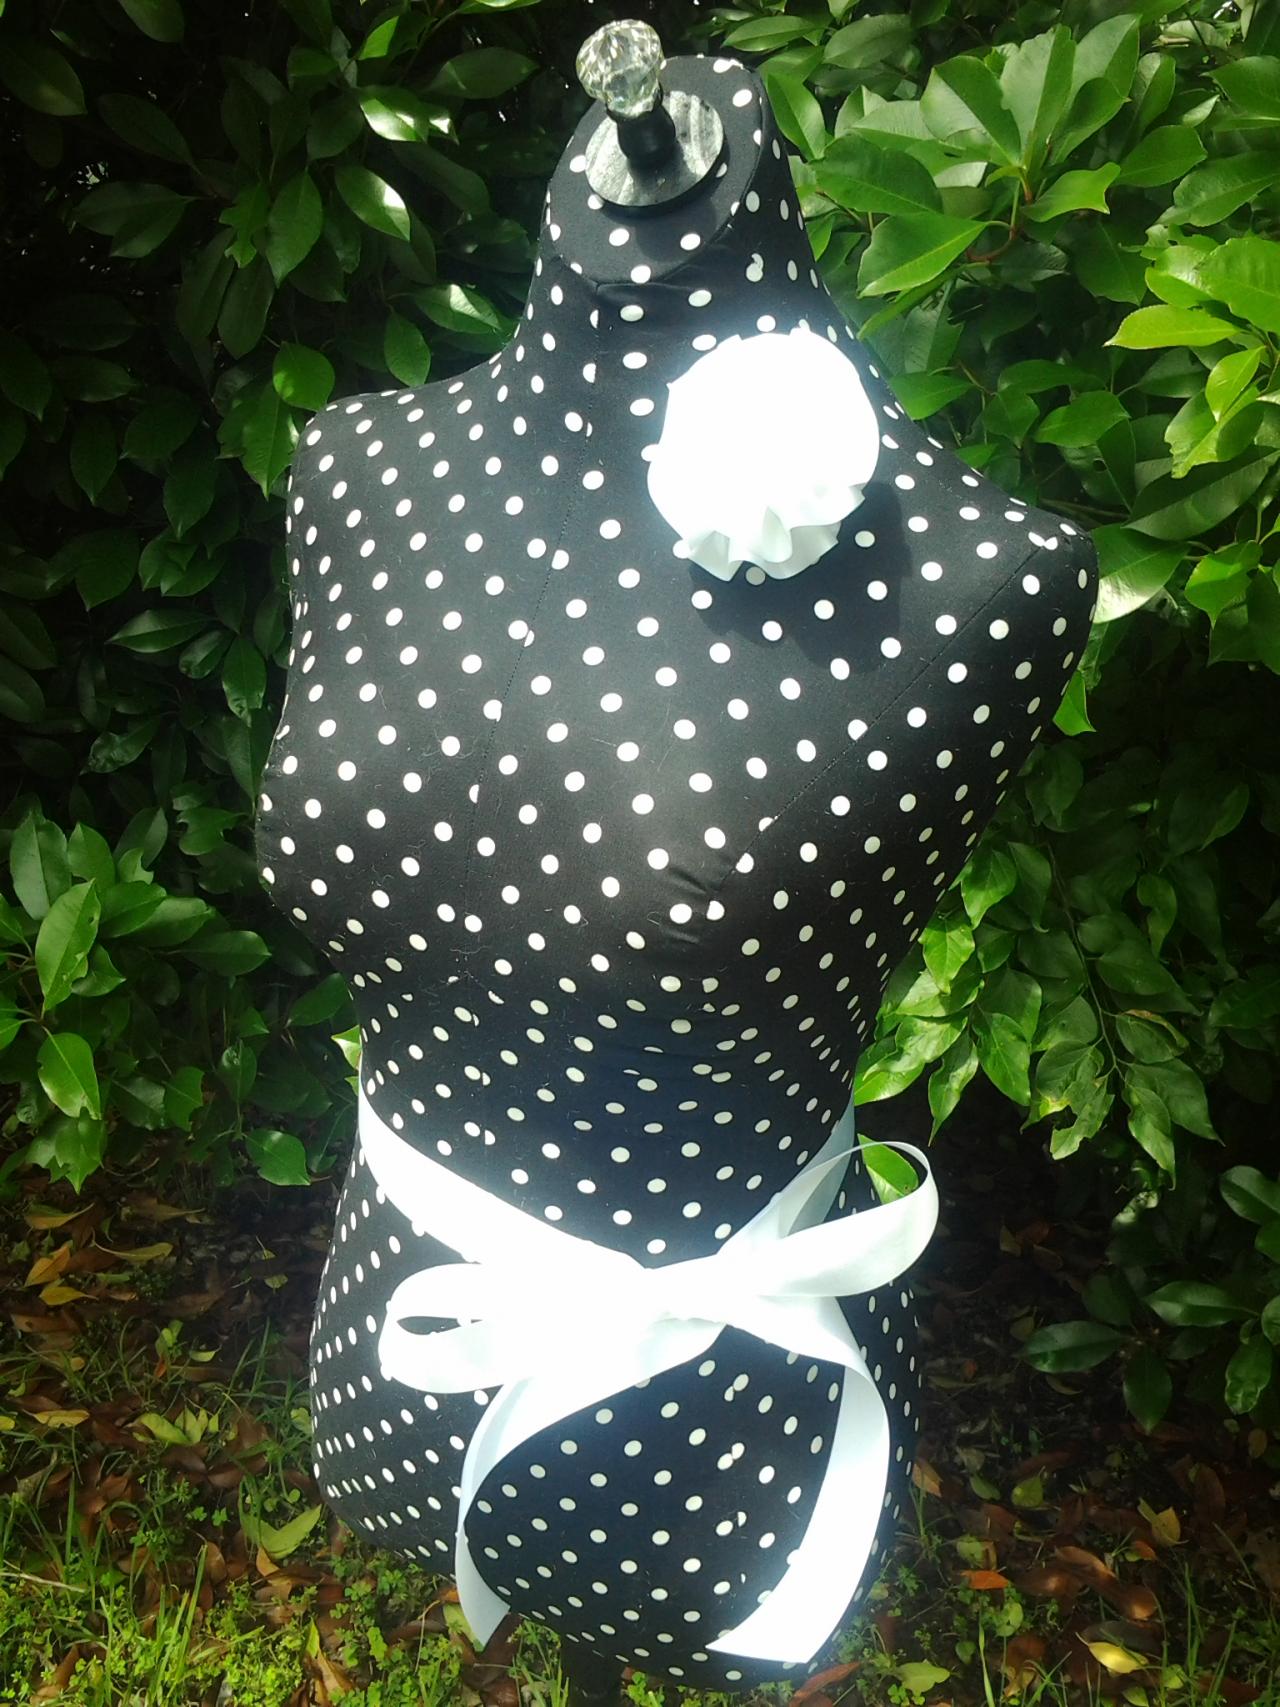 Boutique Centerpiece Dress Form Jewelry Display Stand. Polka Dot Mannequin Torso Designs Pin Cushion, Craft Show, Bedroom Decor, Organizer,